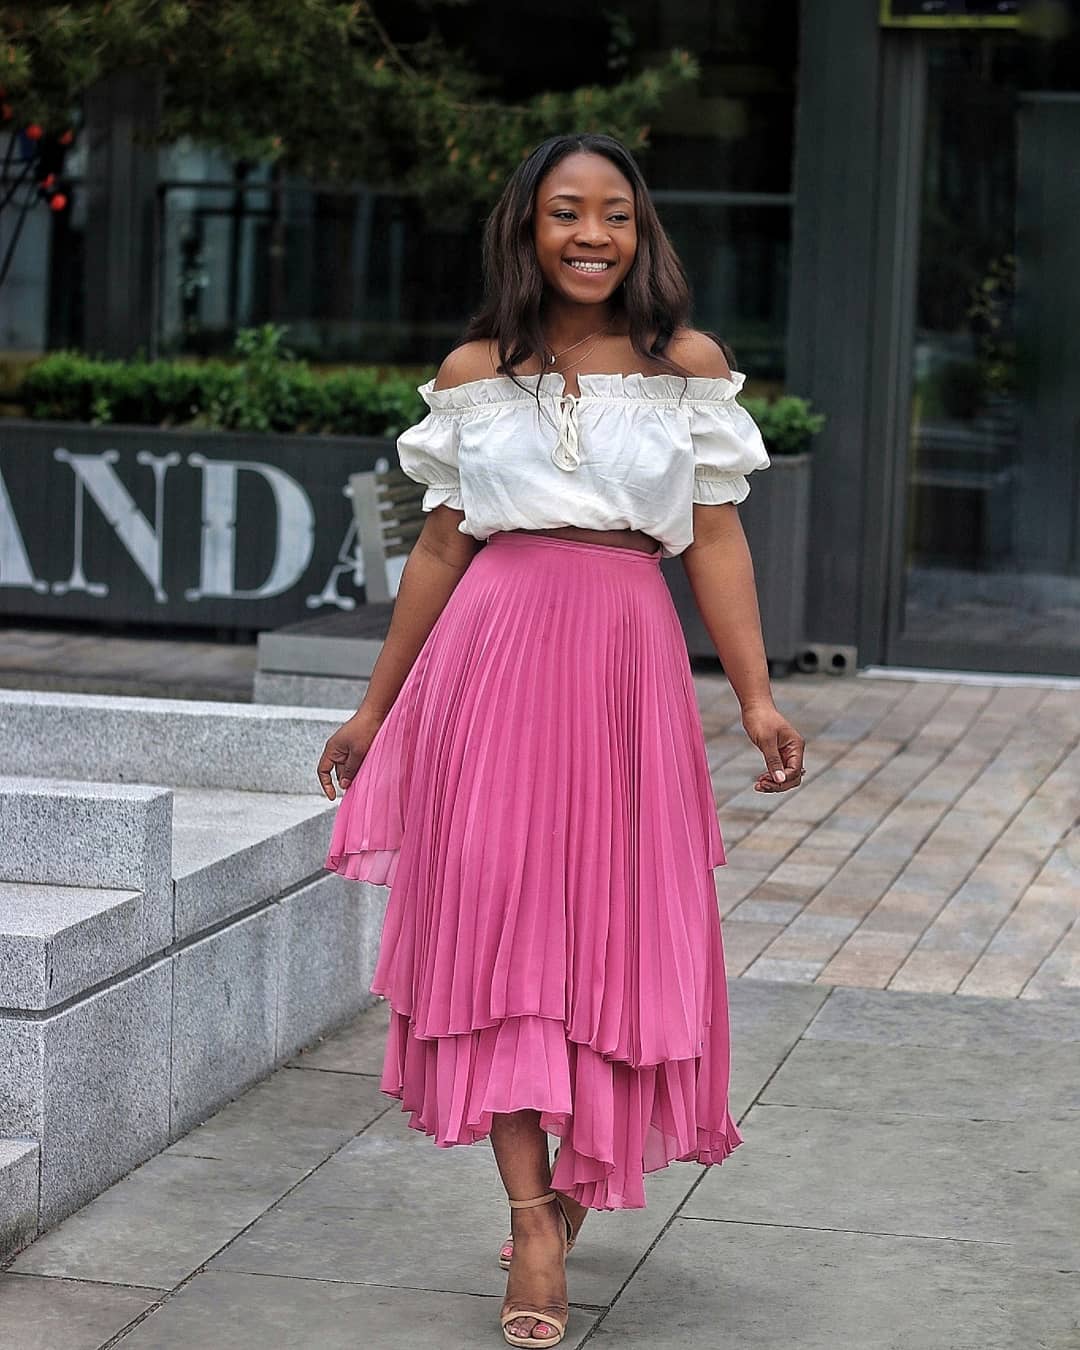 The Best Summer Outfit Ideas For Brunch in 2019!